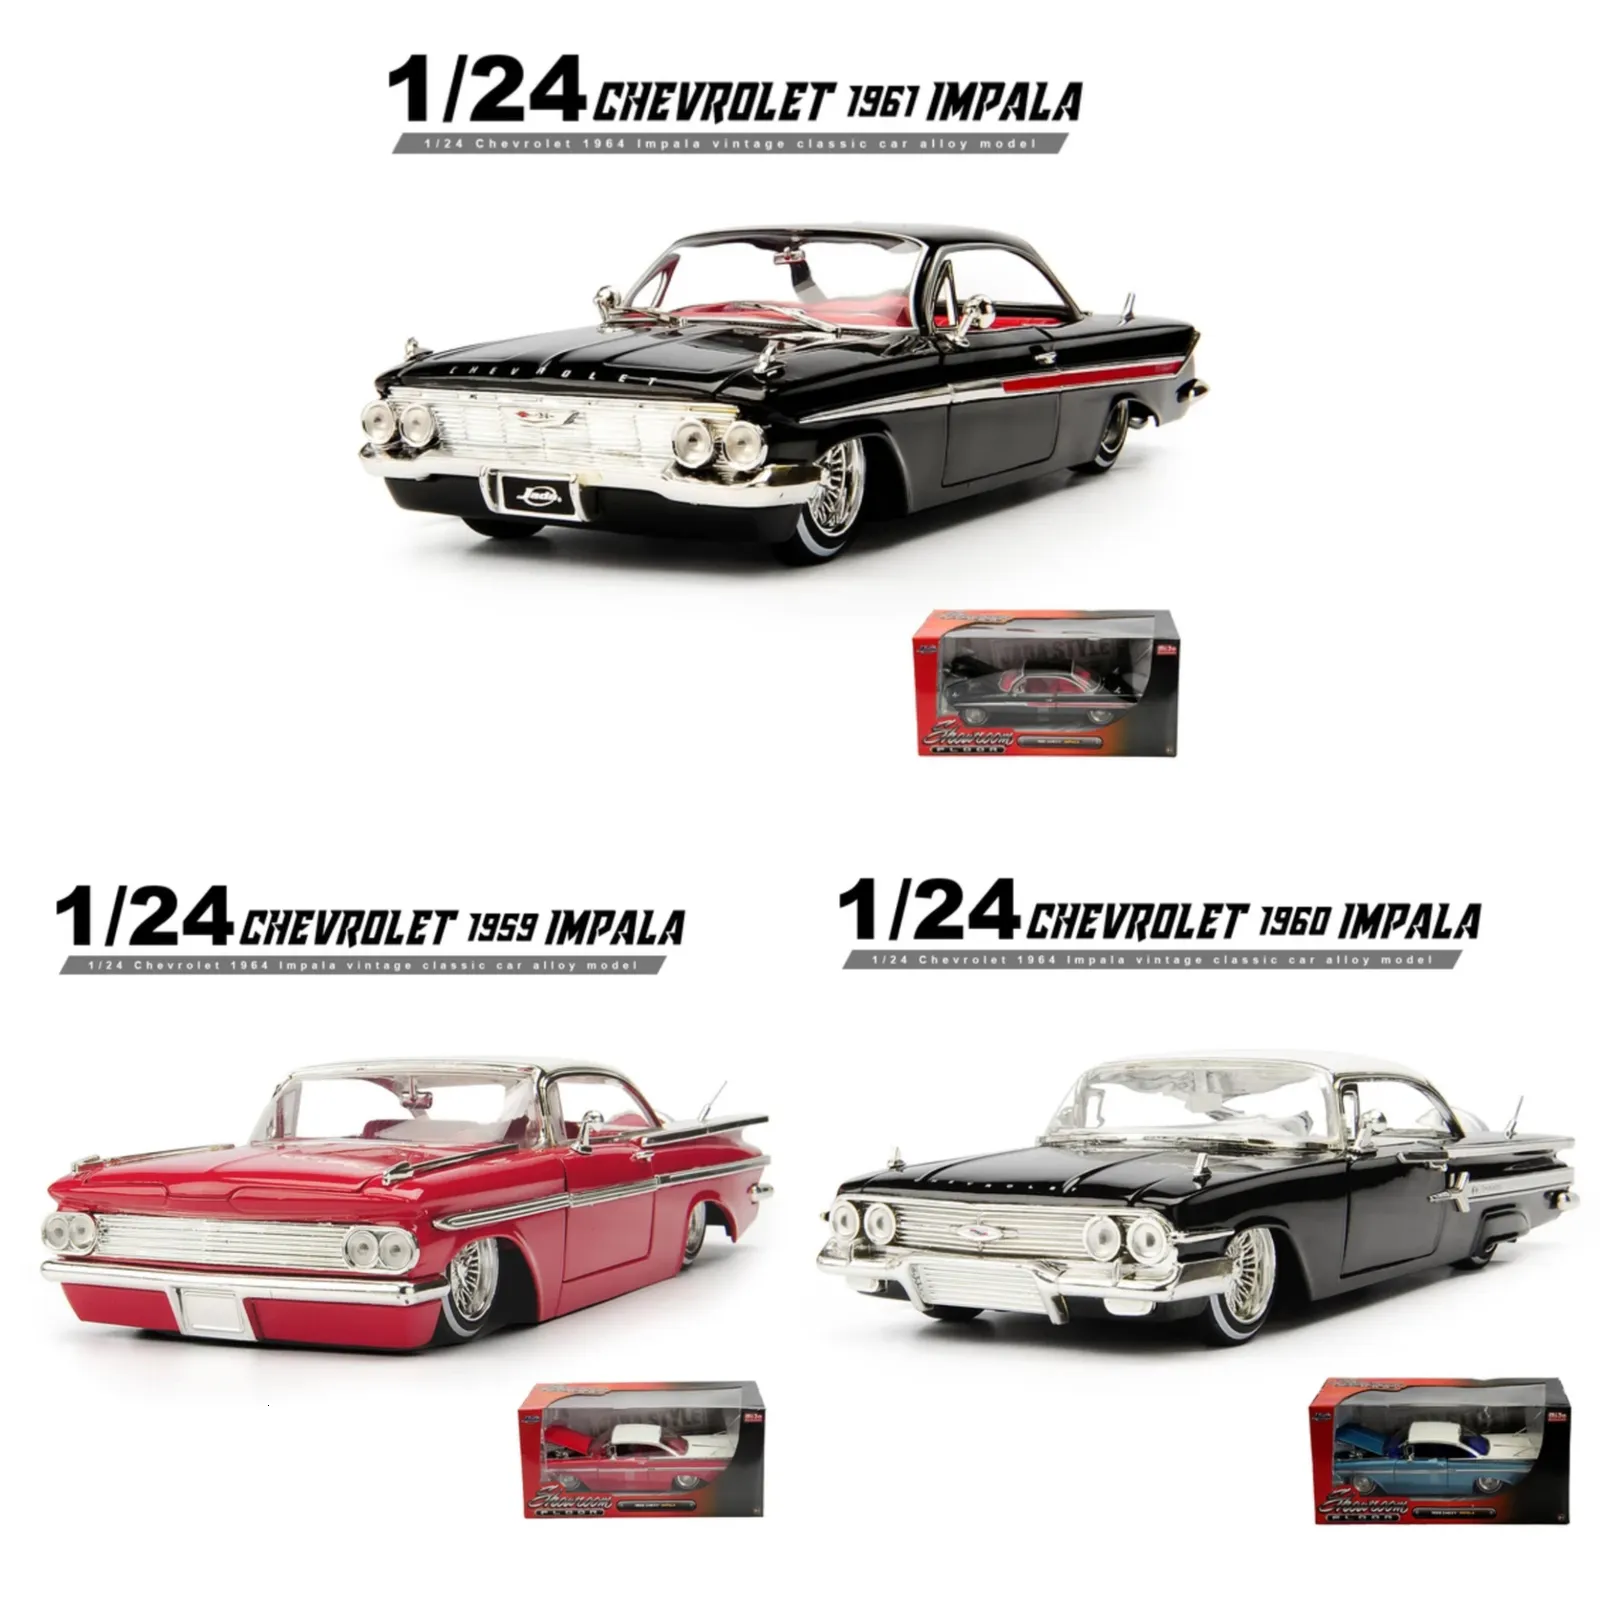 Diecast Model car Jada Impala 1 24 Scale Diecast Car Model Alloy Classic Vehicle Adult Collection Gift Toys Souvenir Toy 230829